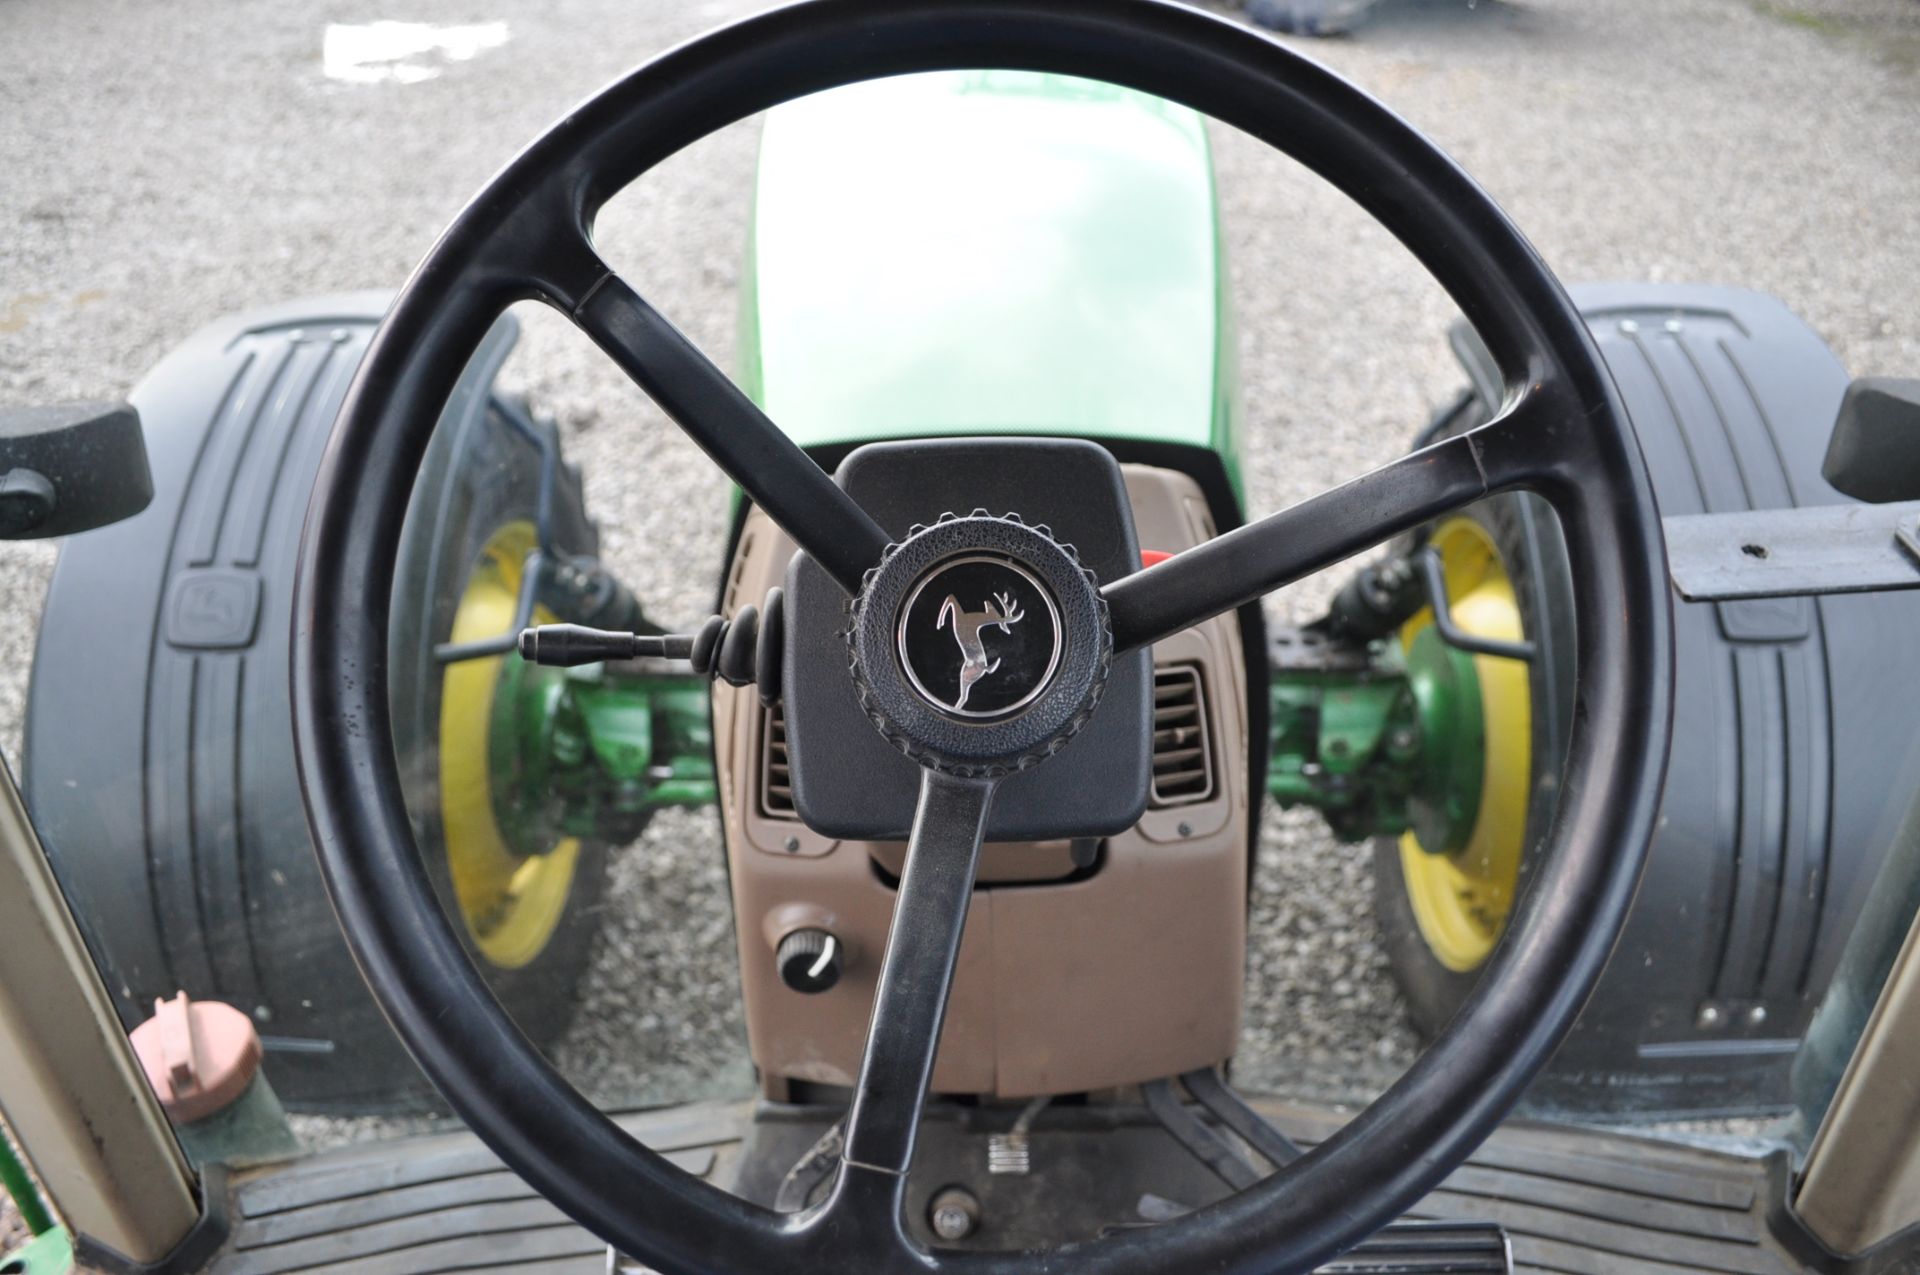 John Deere 8300 tractor, MFWD, 480/80 R 46 duals, 380/85 R 34 front, fenders, front wts, 4 hyd - Image 20 of 21